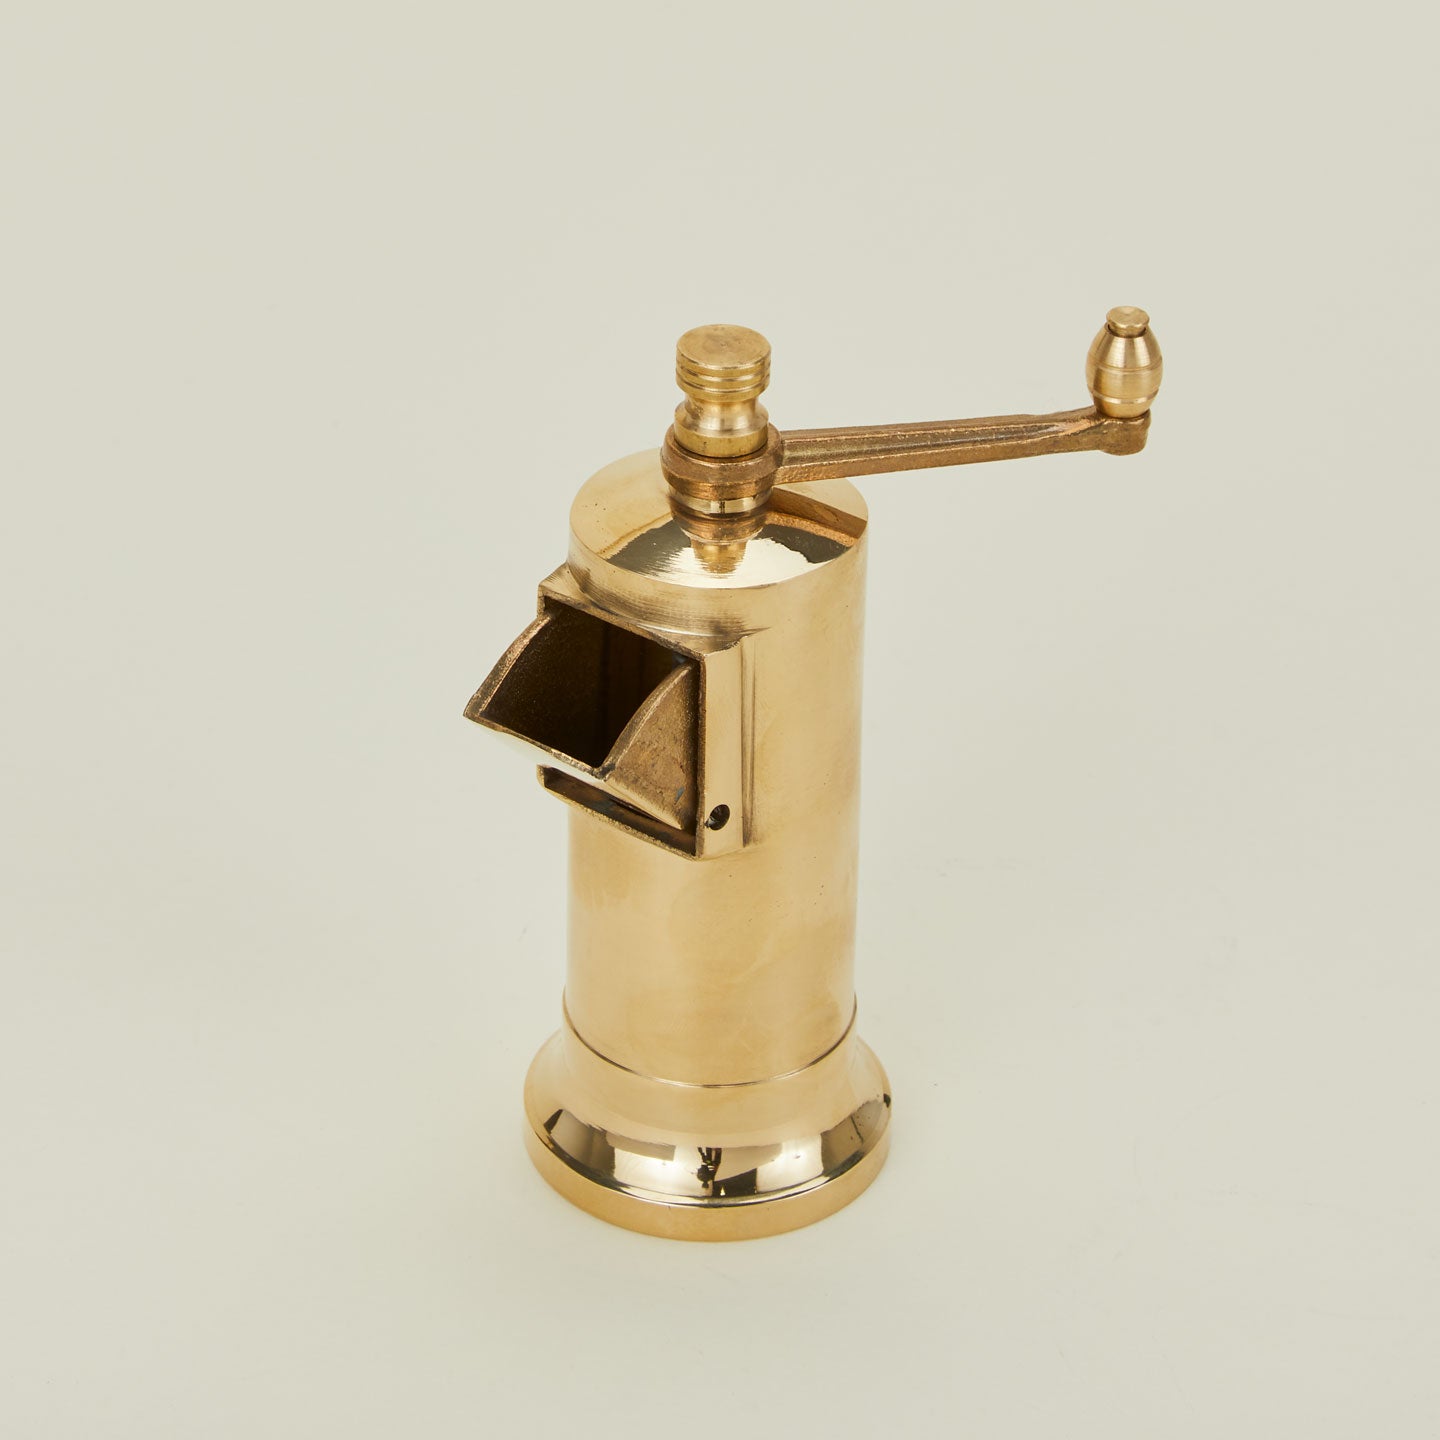 A close up of a brass spice grinder with handle.